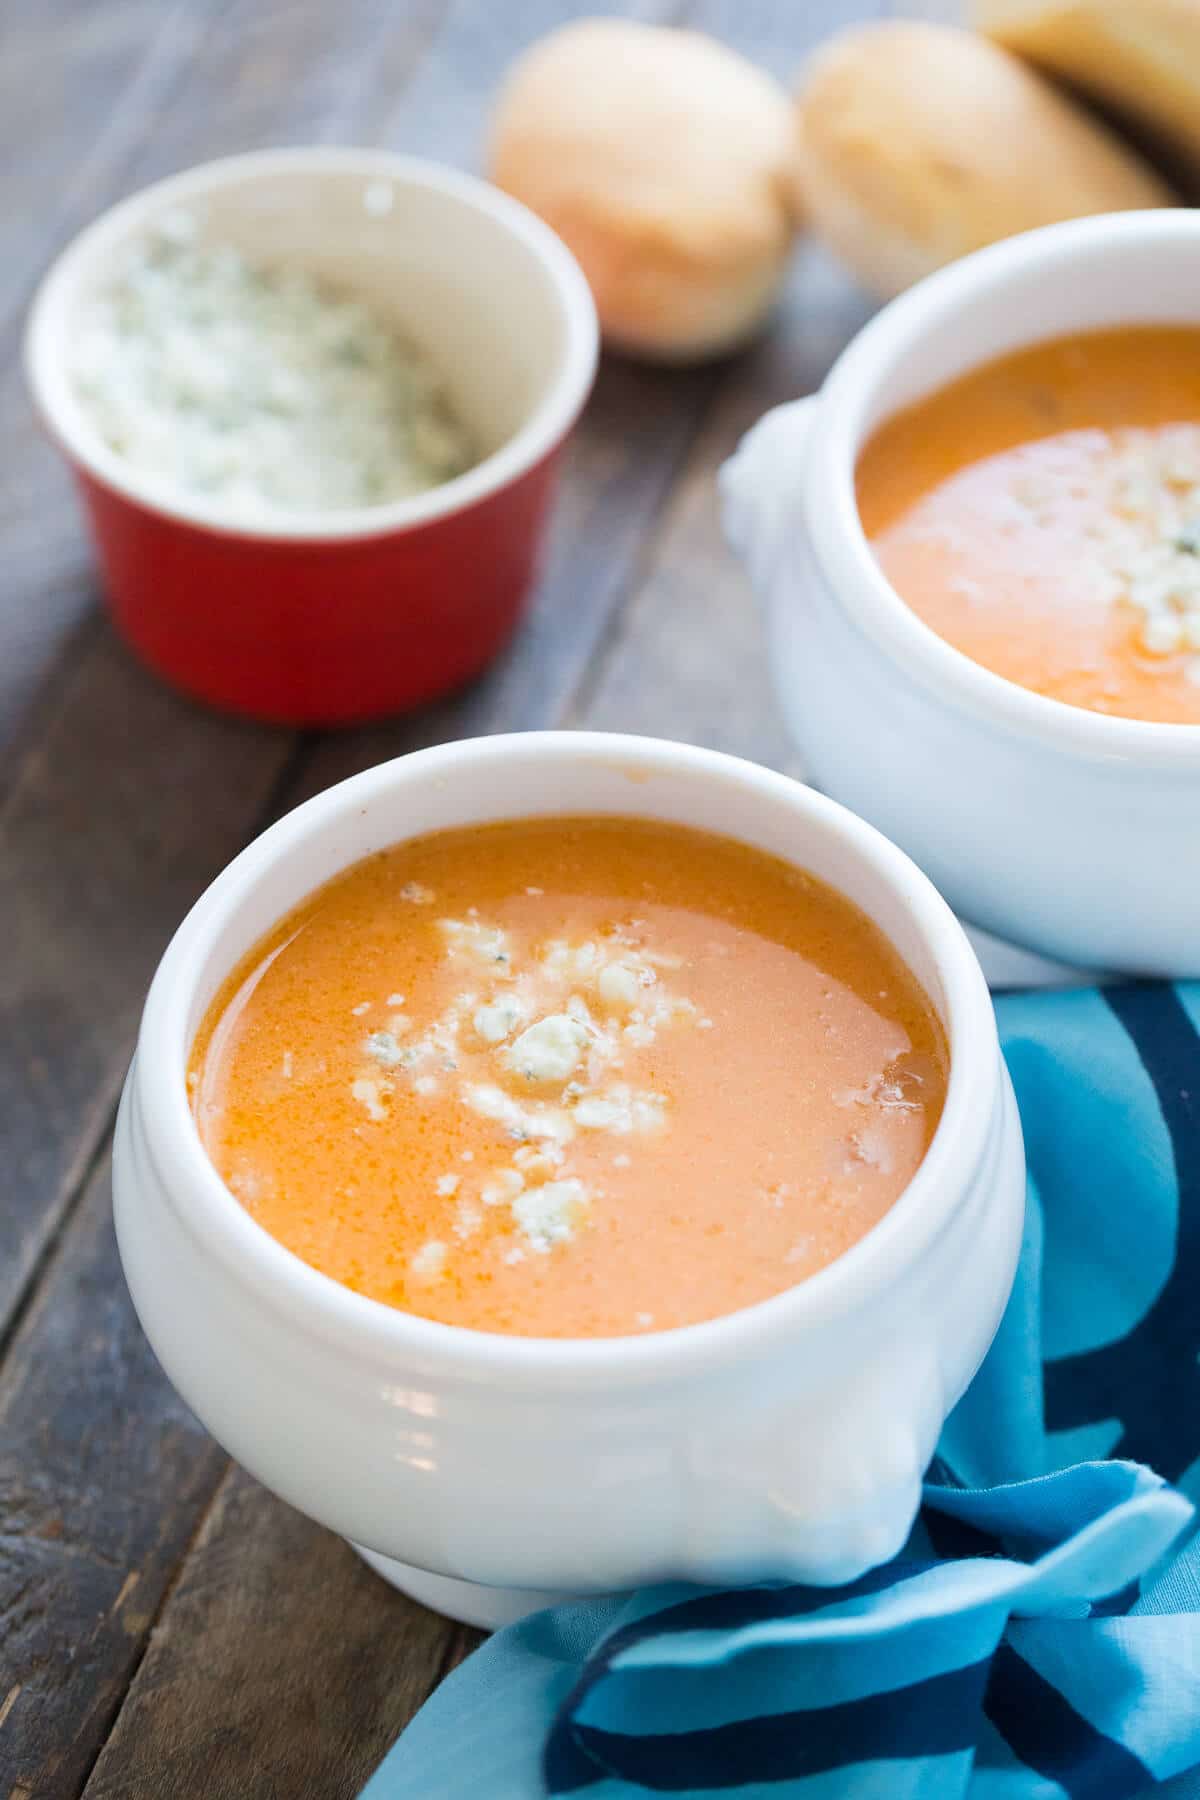 This Buffalo chicken soup is rich and creamy and boasts lots of tangy Buffalo flavor!